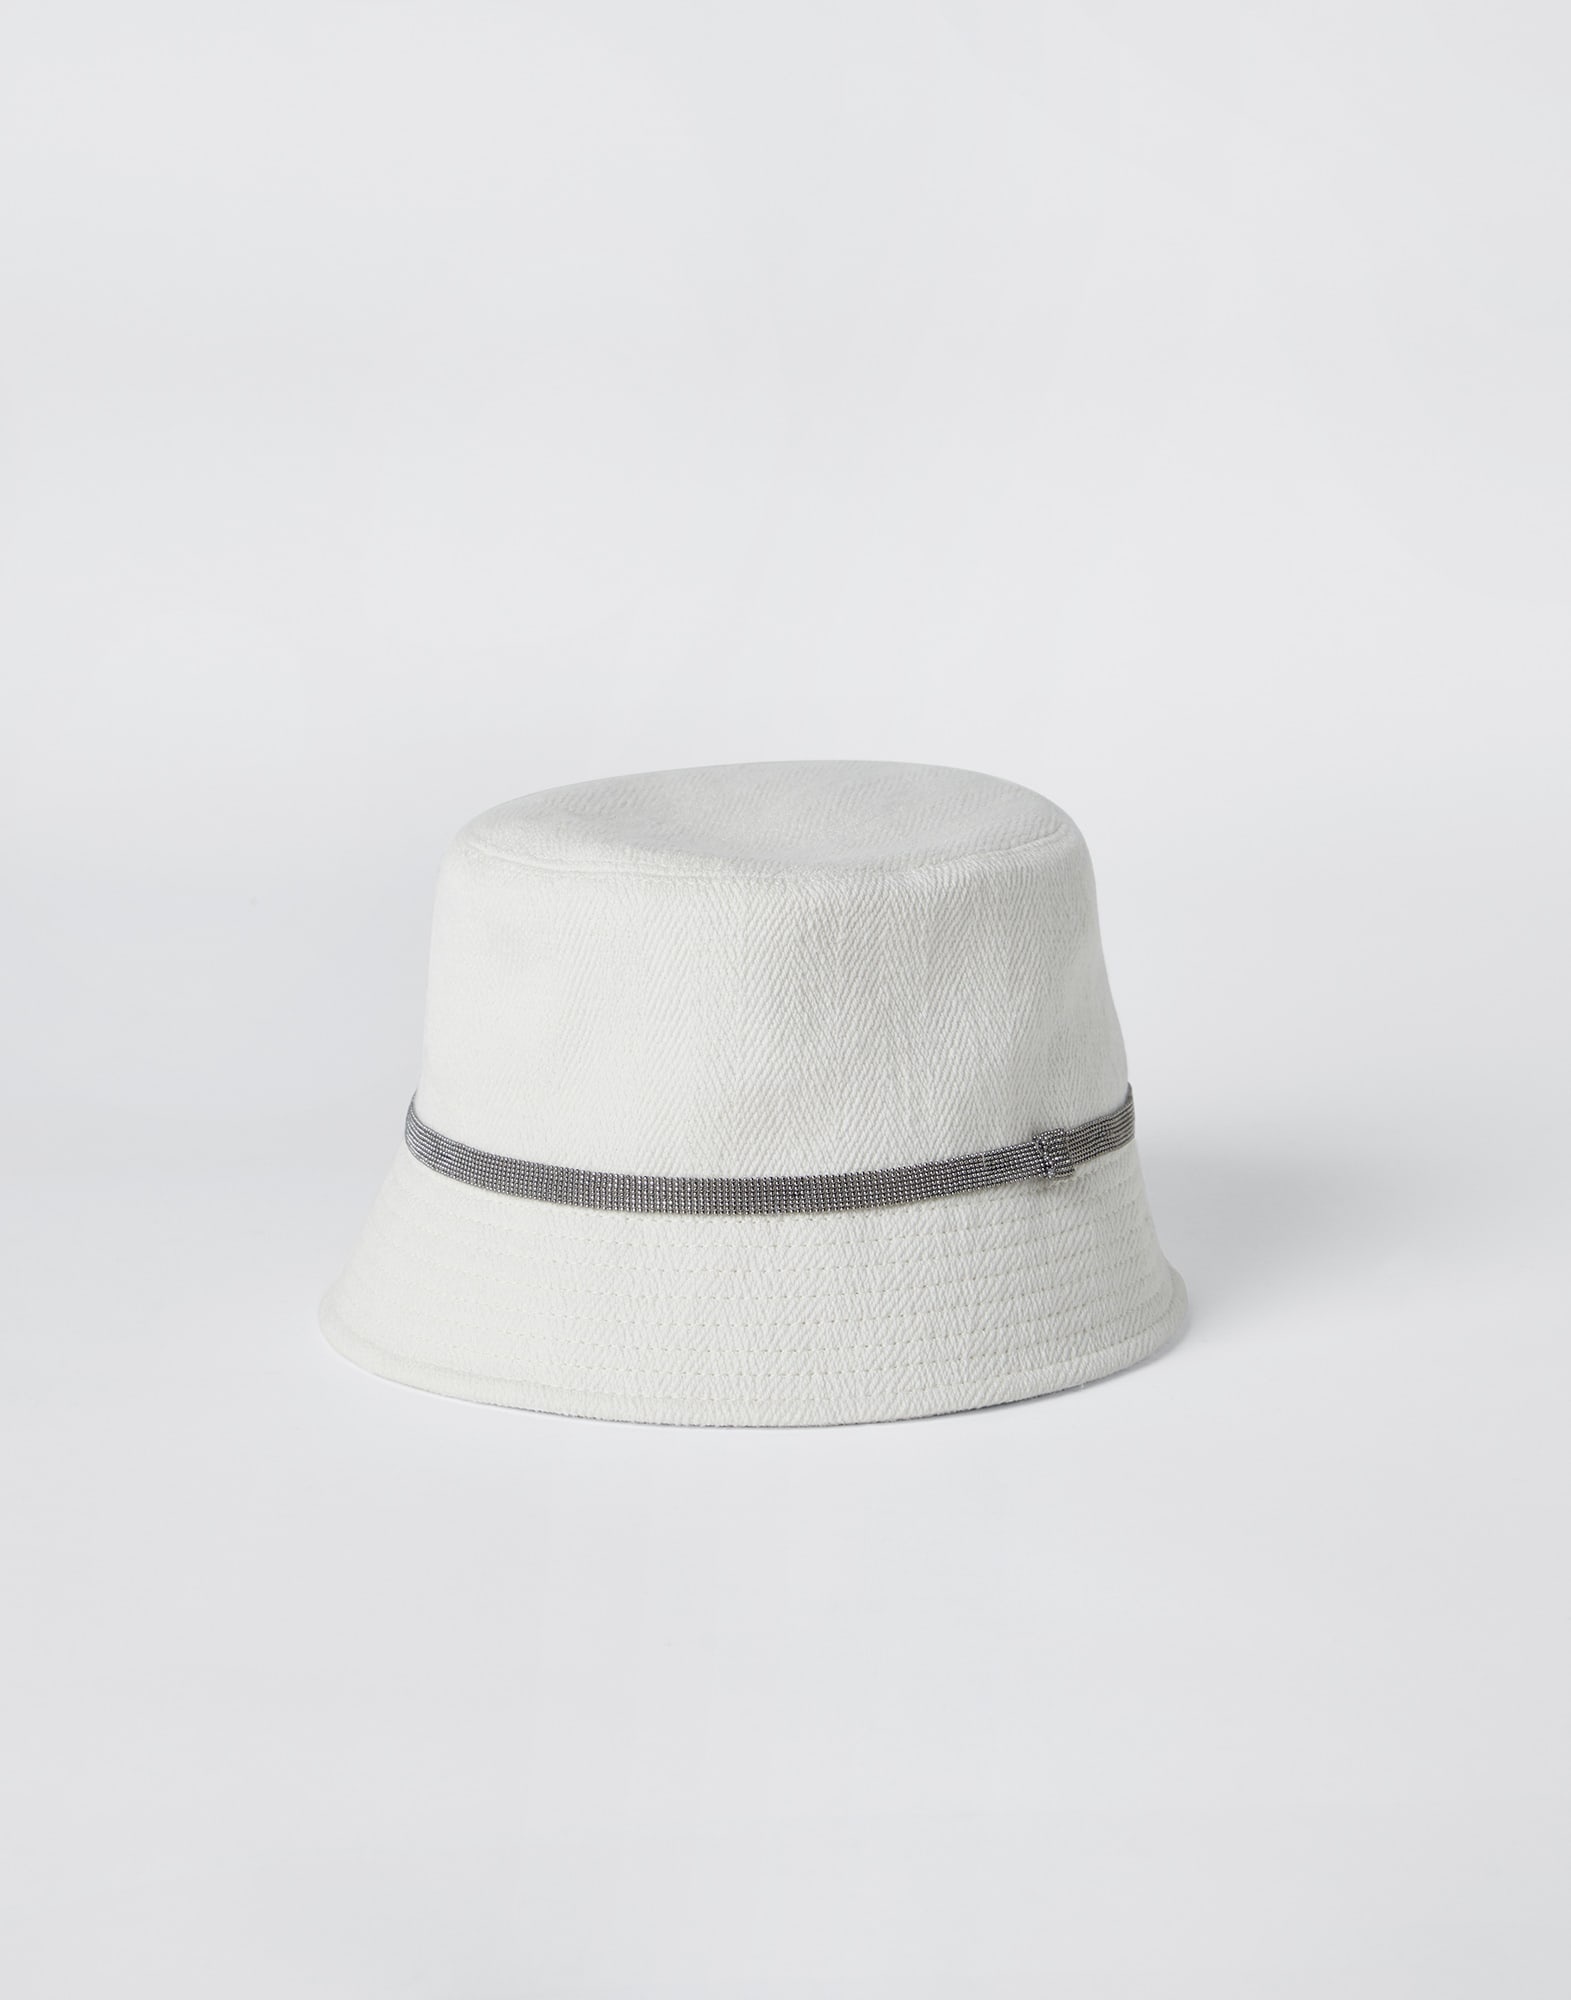 Cotton and linen chevron bucket hat with shiny band - 1